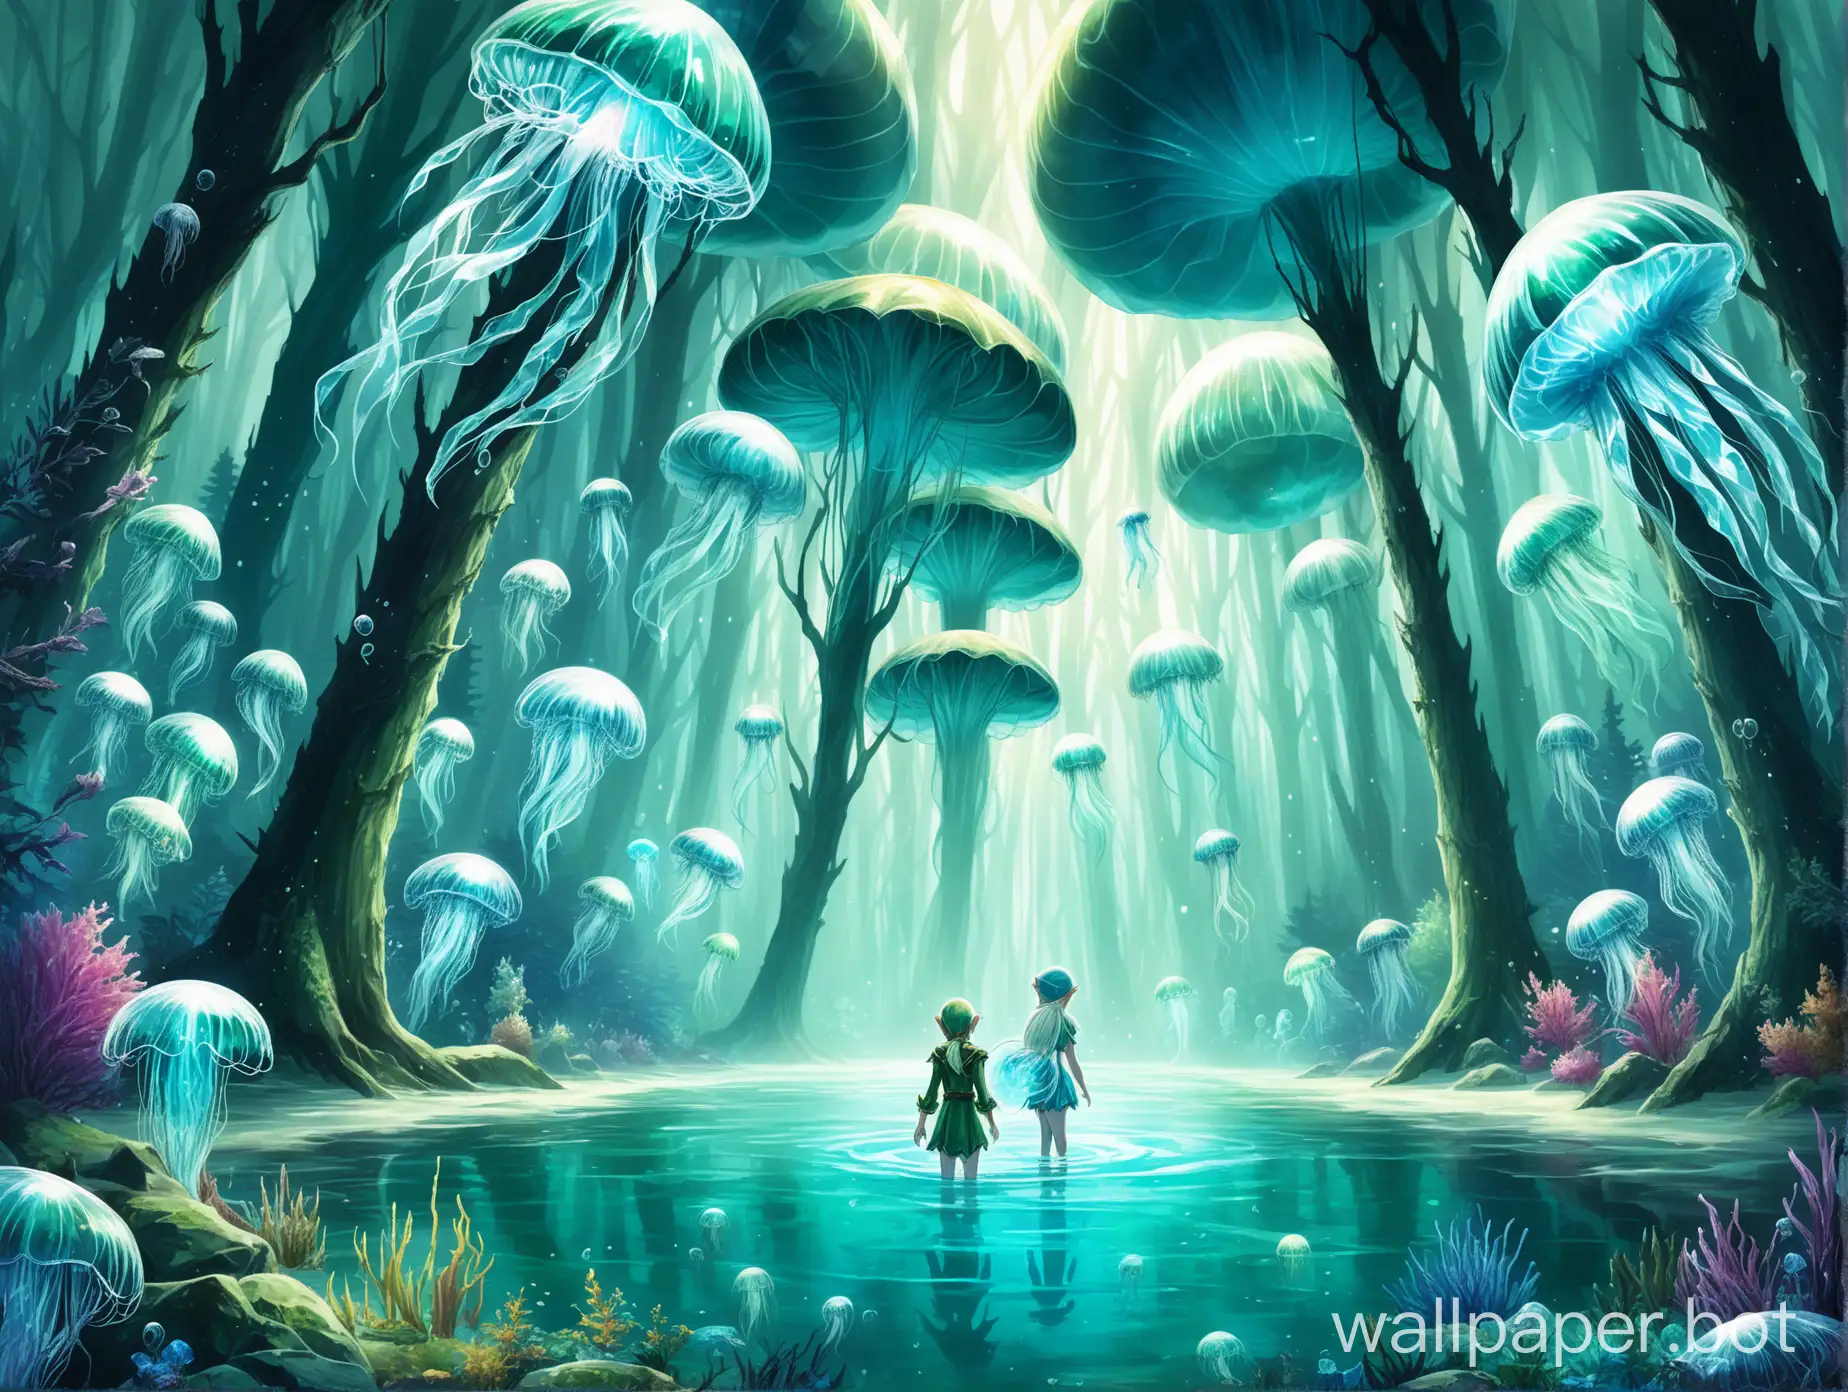 Enchanted-Crystal-Forest-Elf-Holding-Jellyfish-in-Shallow-Waters